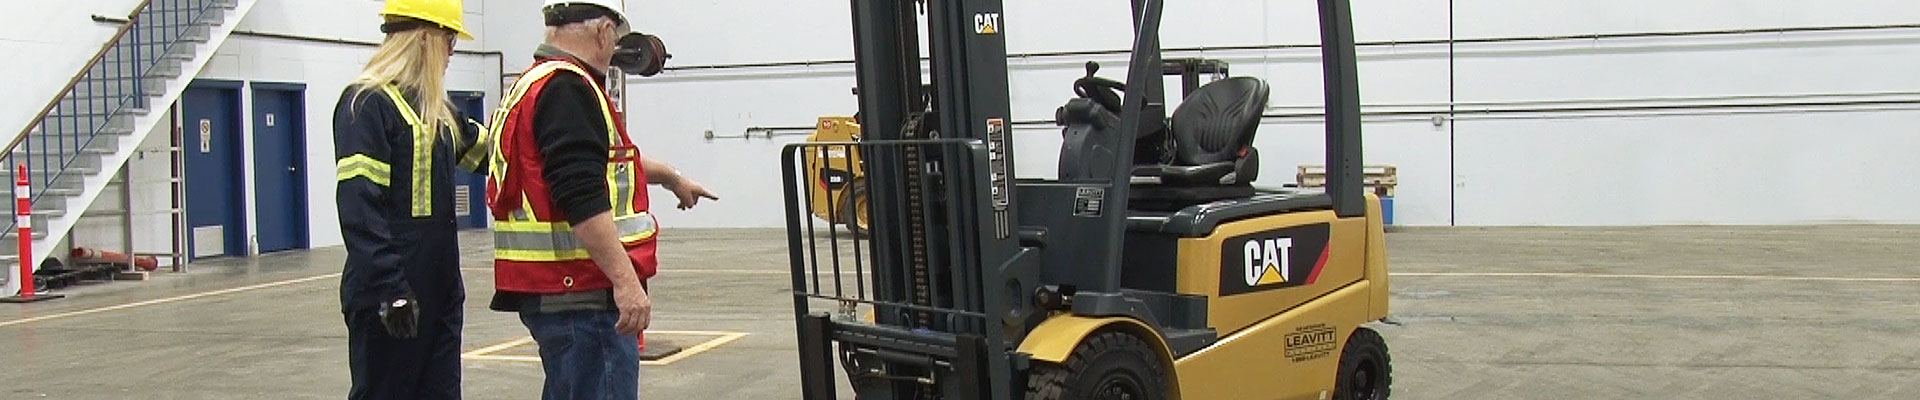 Workers doing operator training on a counterbalanced forklift